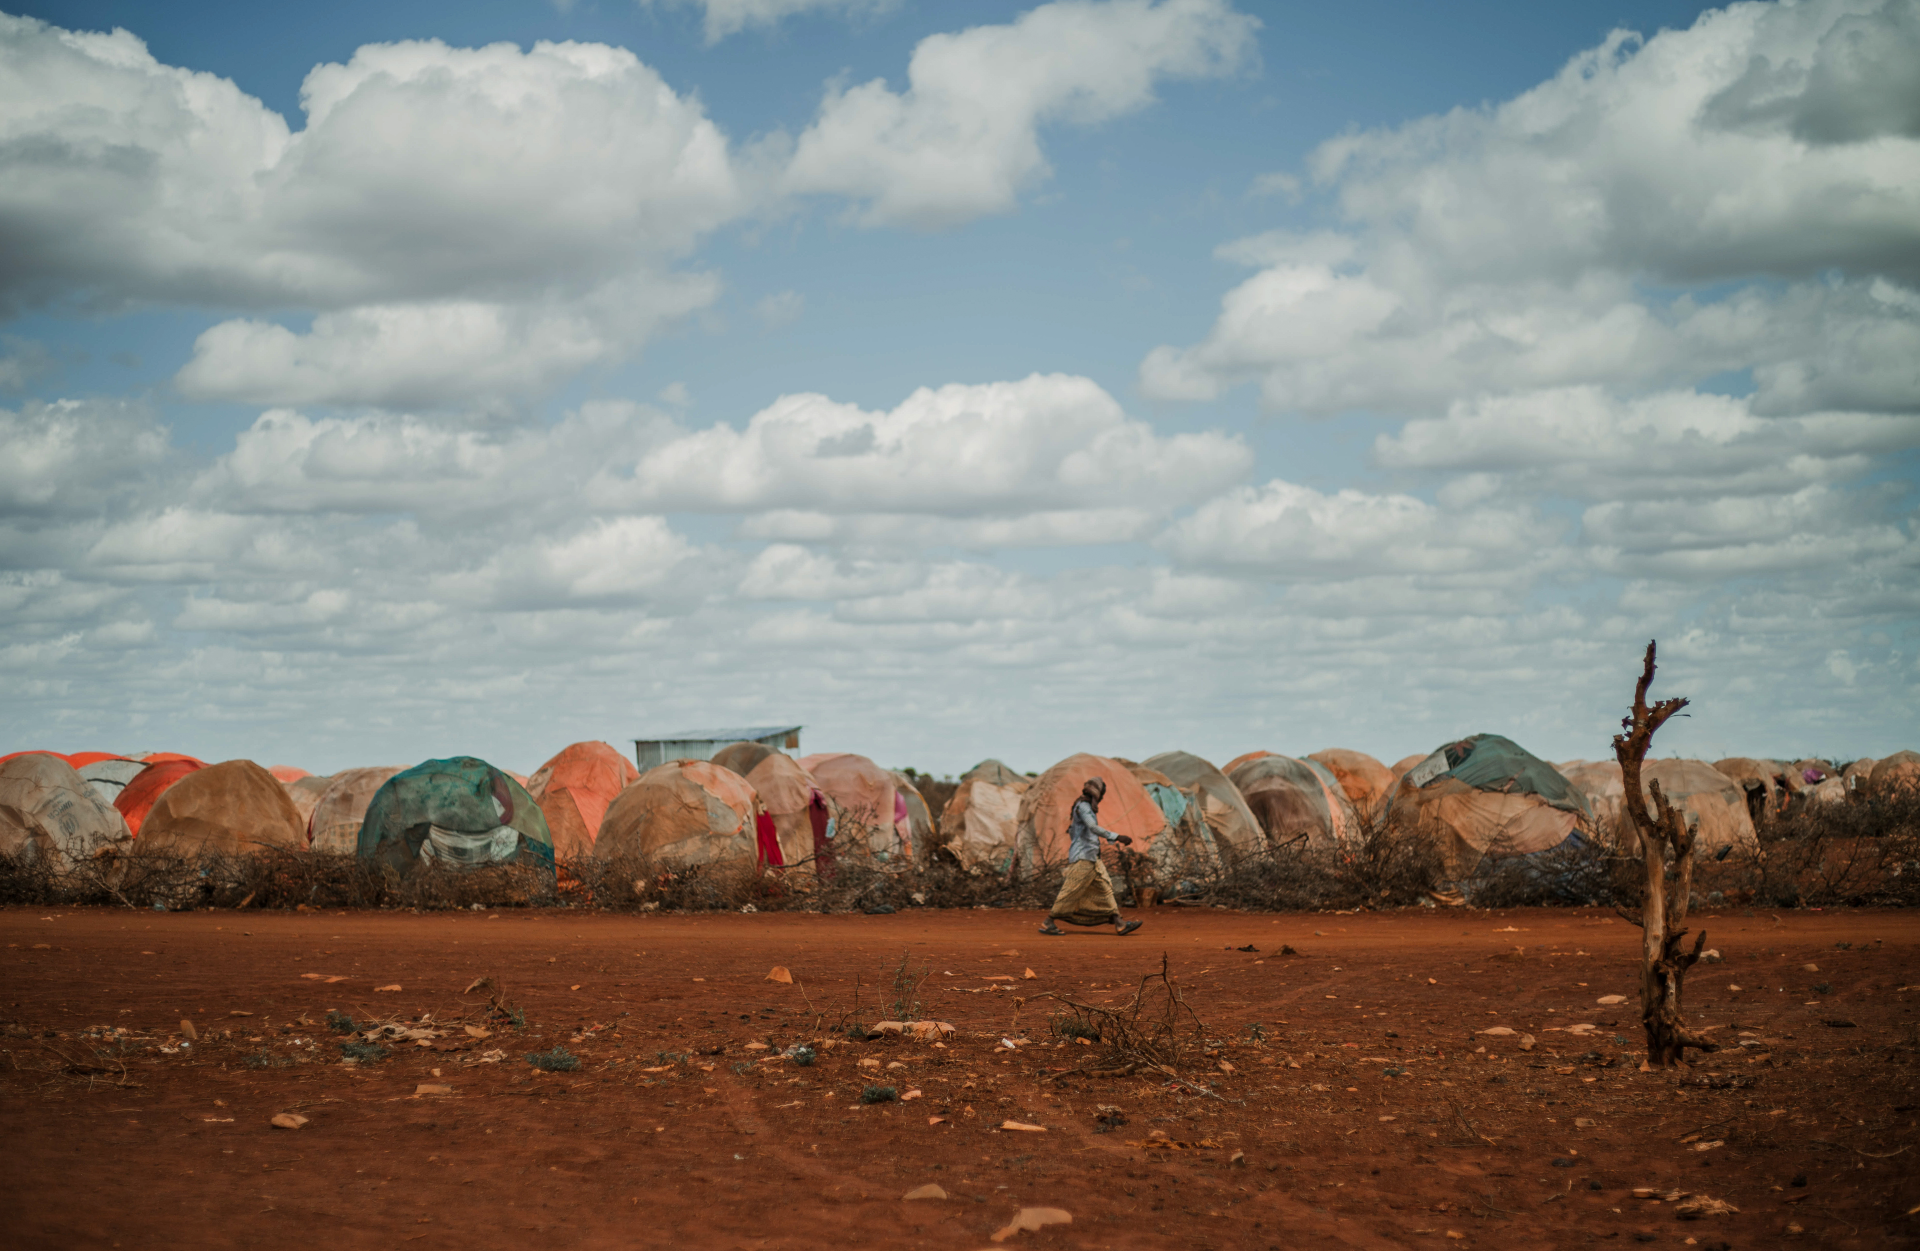 A wmen walks in front of a row of makeshift shelters in Somalia. The environment is barren and drought-stricken.